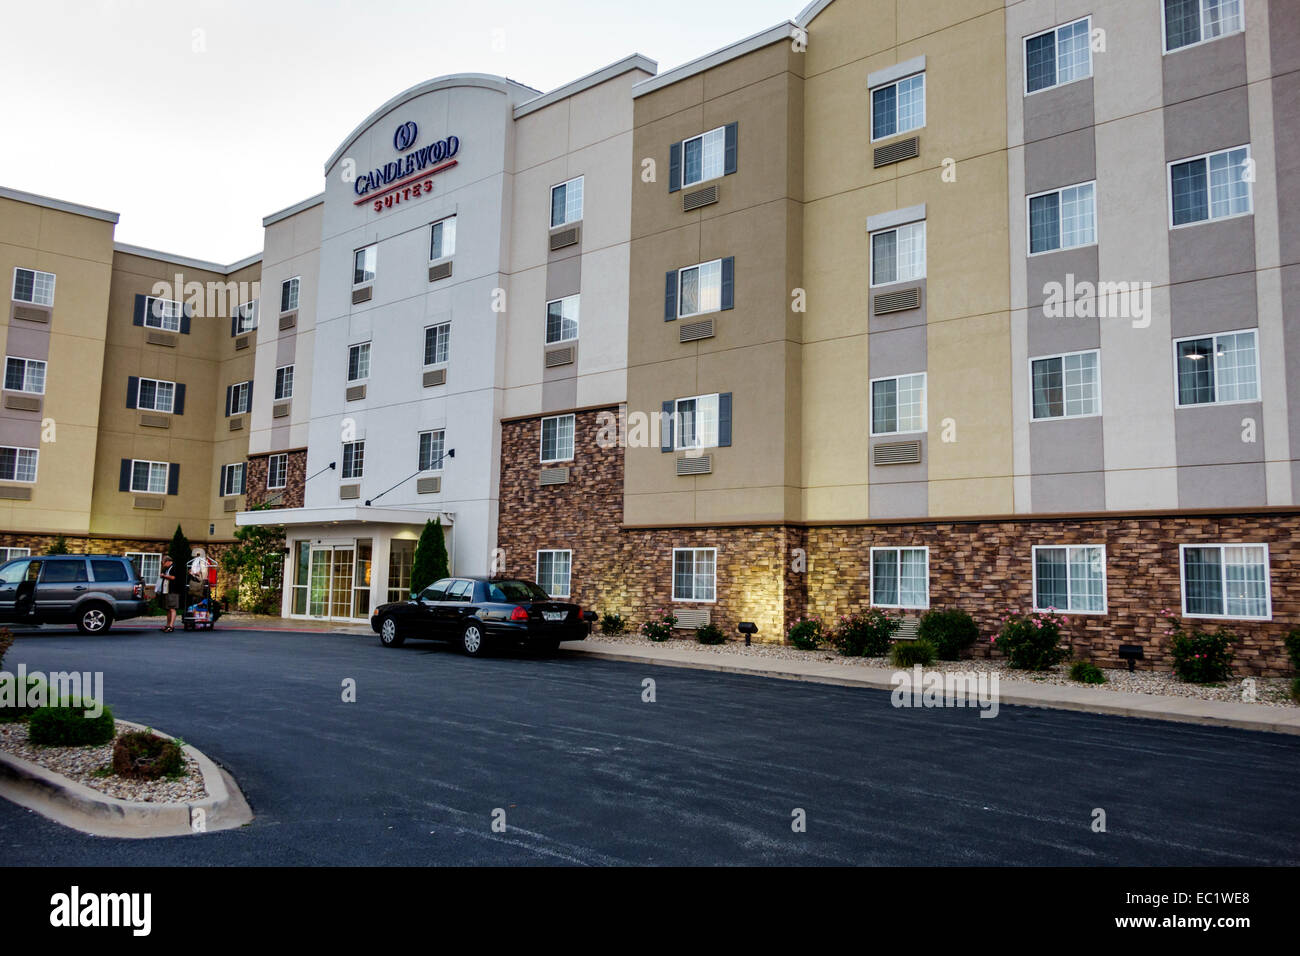 Springfield Illinois,Candlewood Suites,motel,hotel,front,entrance,exterior,IL140902110 Stock Photo